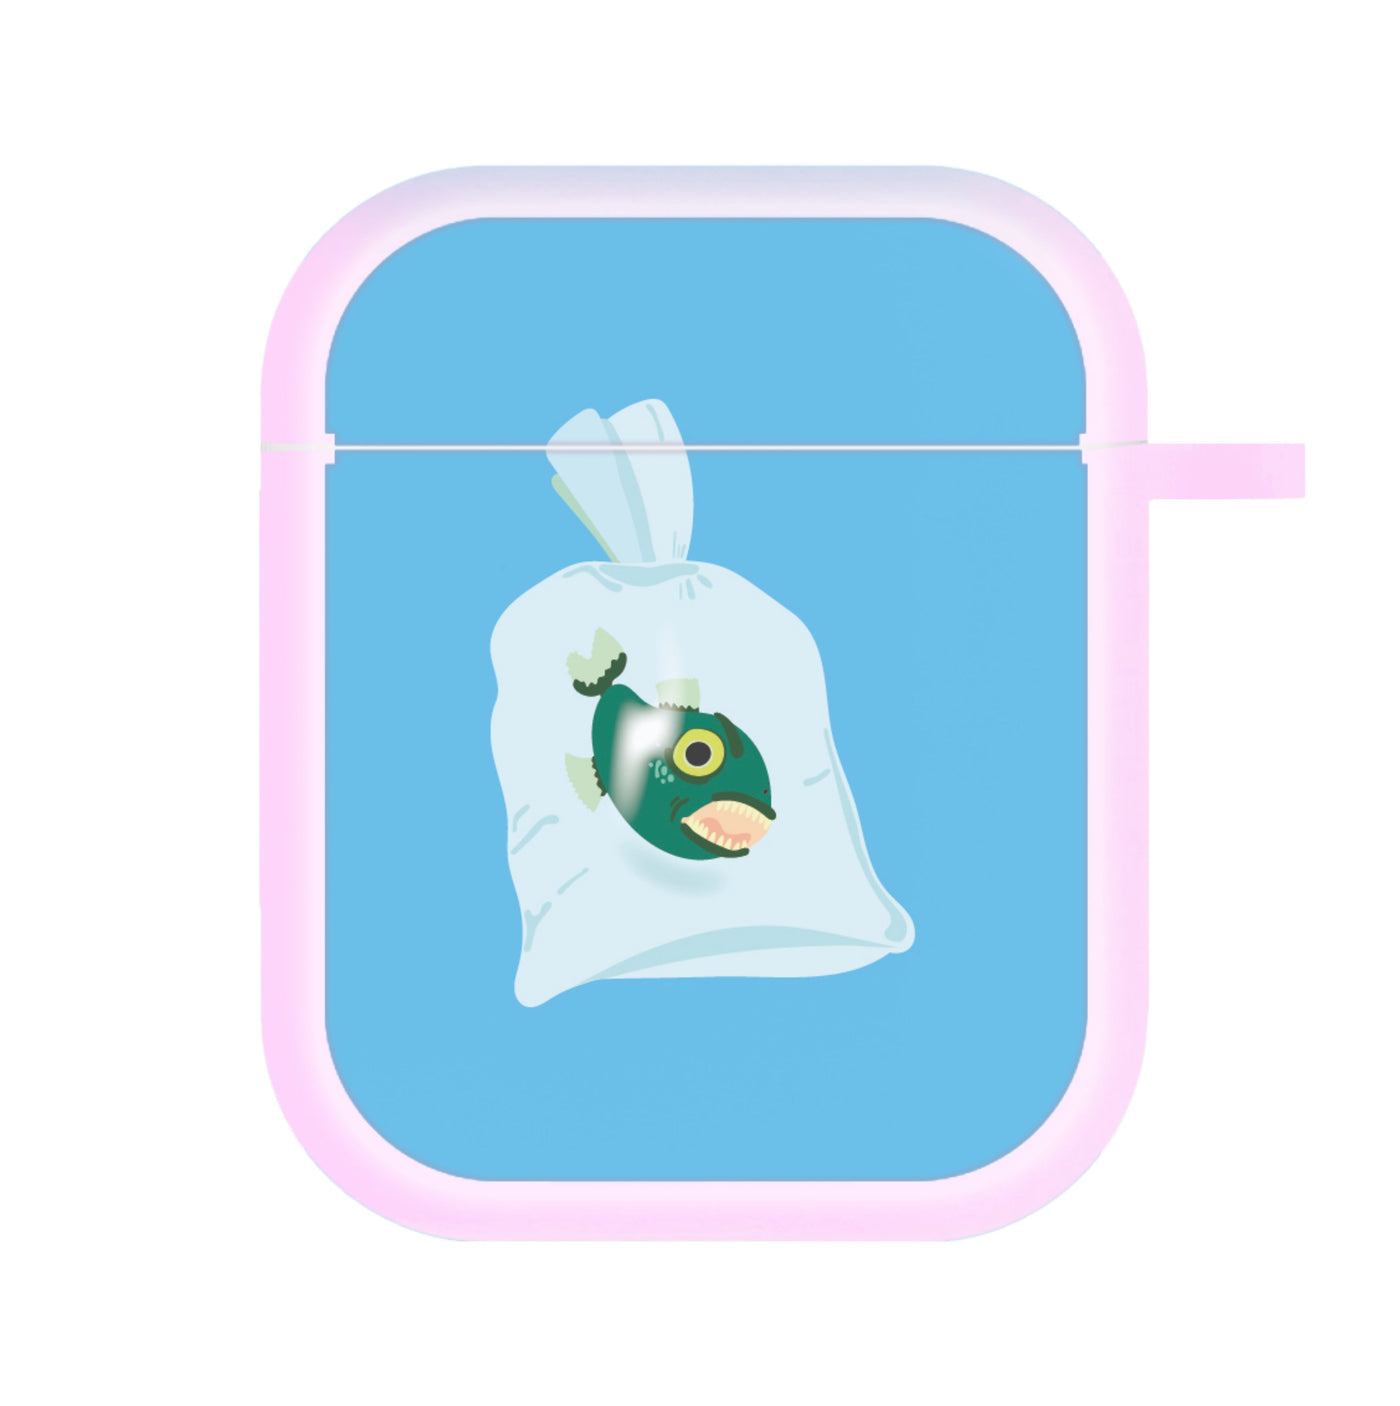 Fish In A Bag - Wednesday AirPods Case